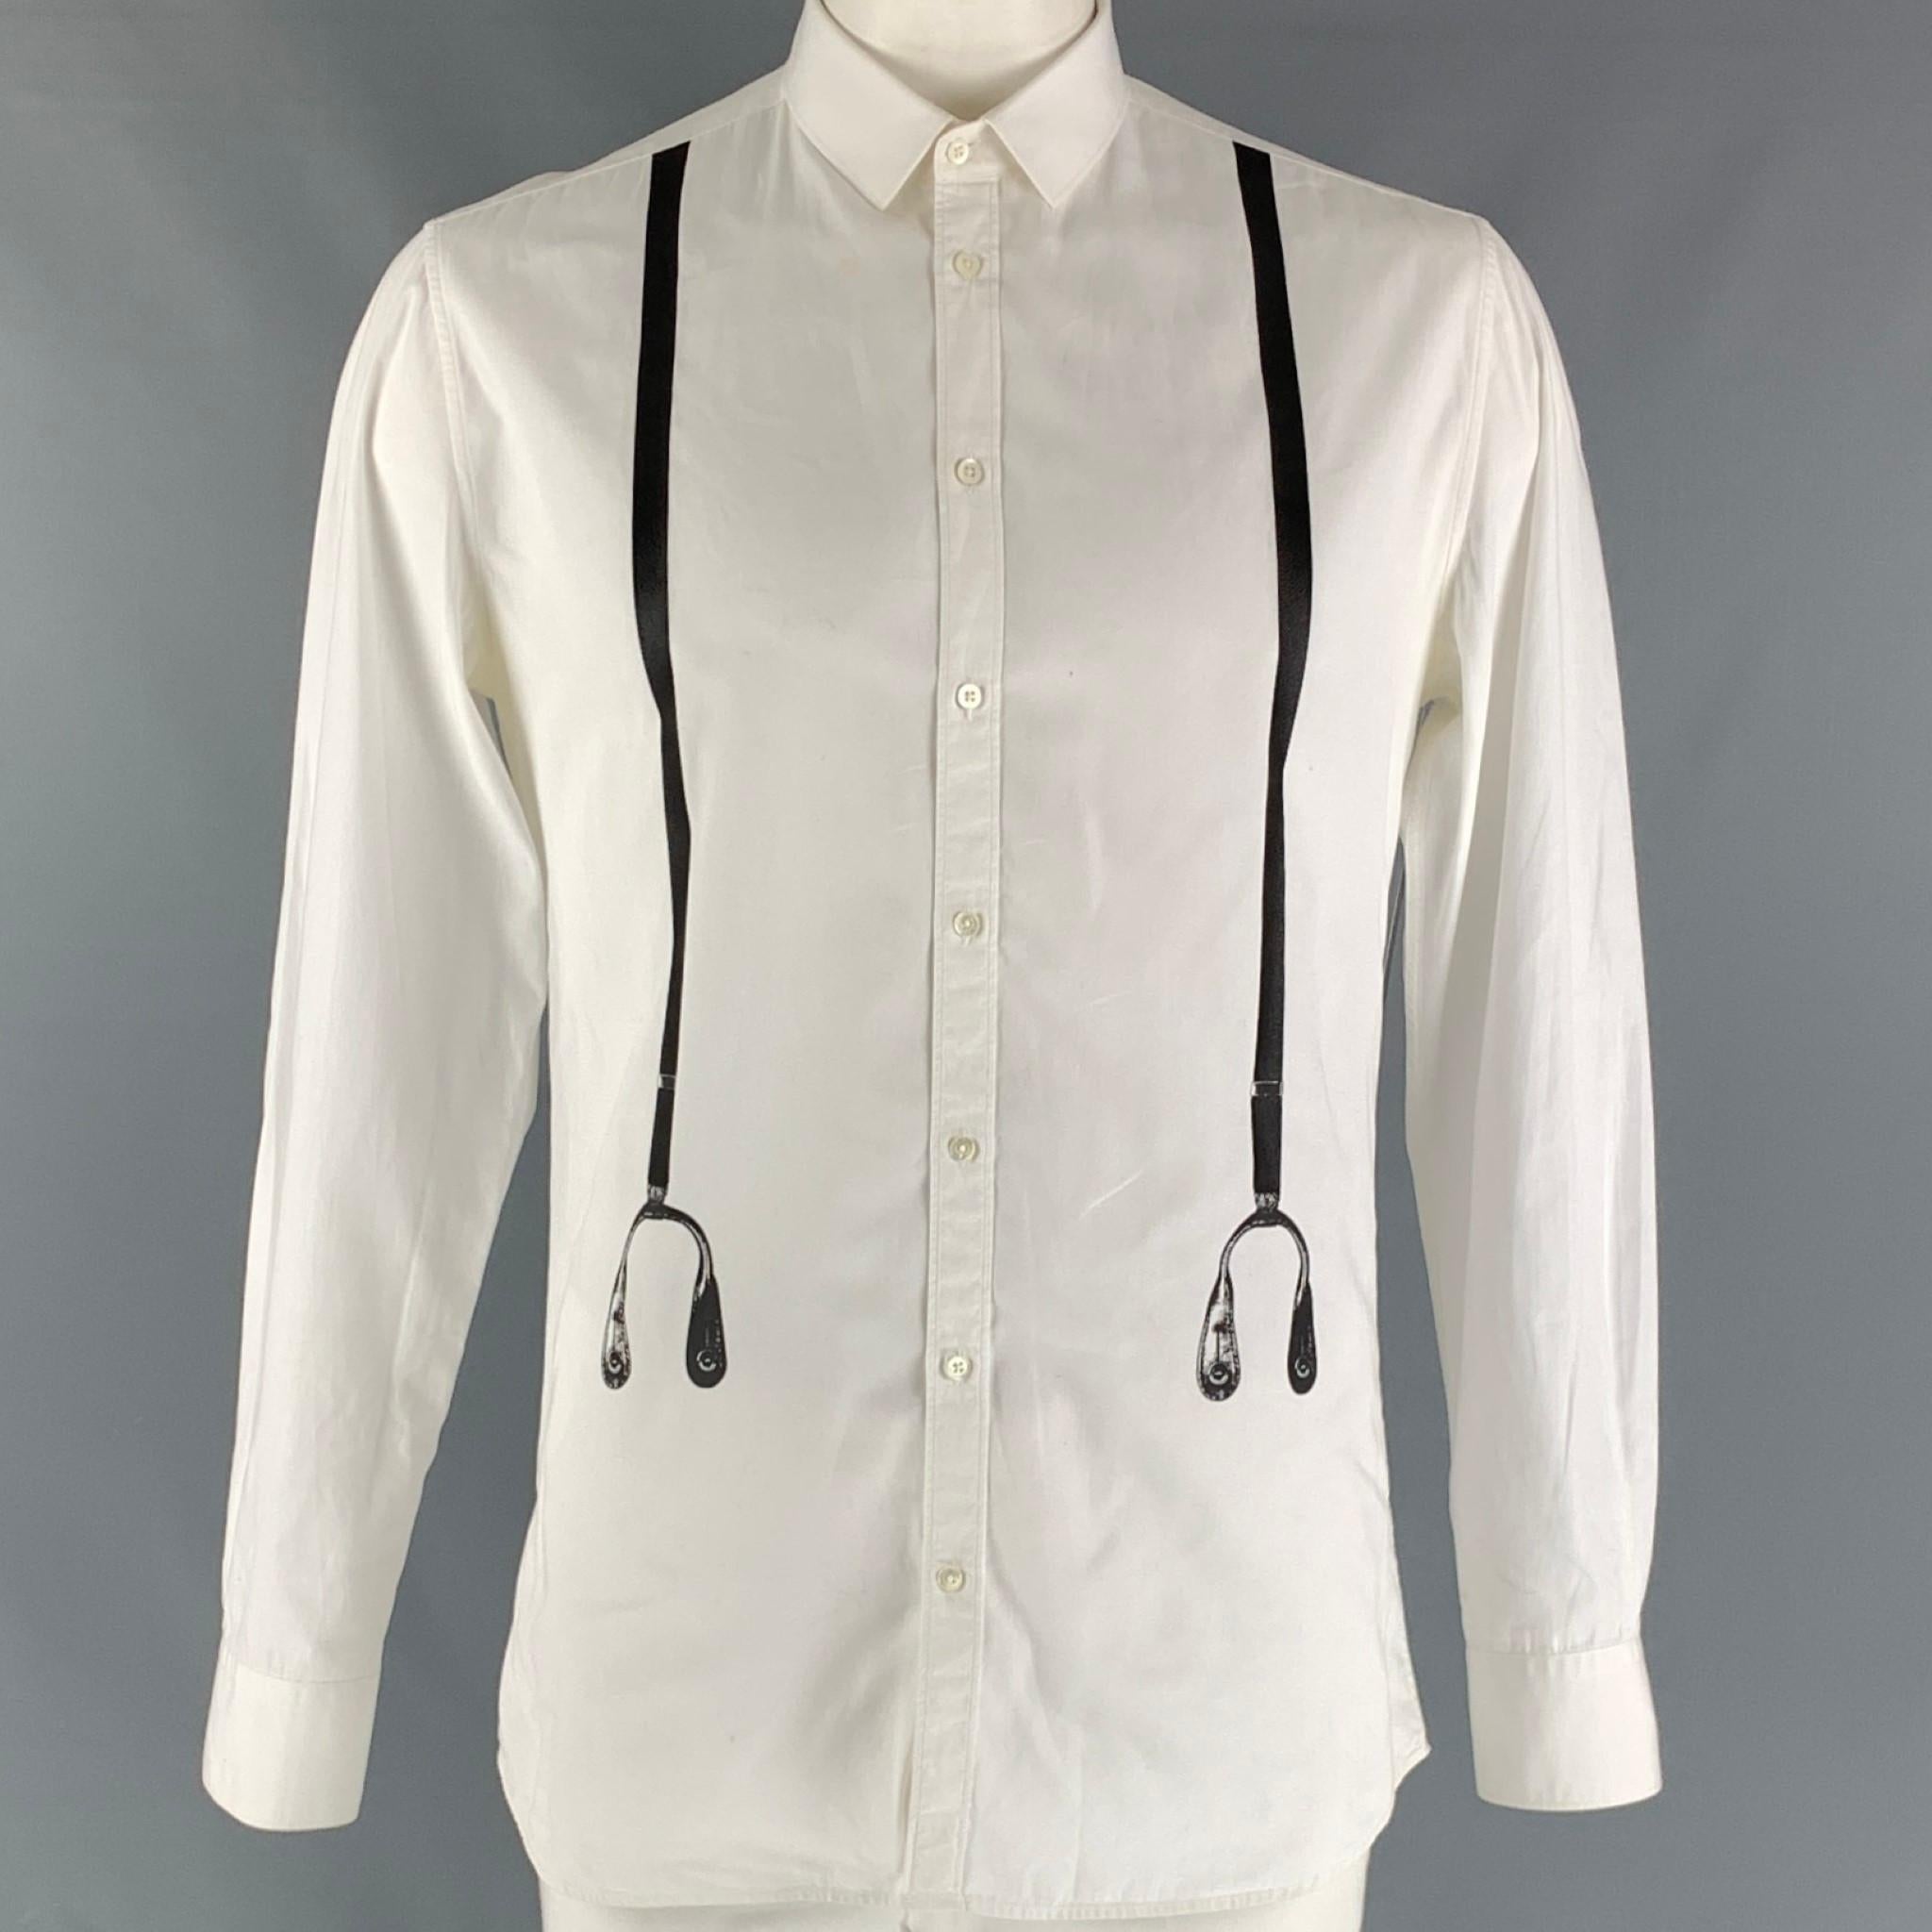 NEIL BARRETT 'slim fit' long sleeve shirt comes in a white cotton featuring a black suspenders print at front, spread collar, and buttons closure. Made in Italy.

Good Pre-Owned Condition. Moderate wear. Discolorations through out.
Marked: 42- 18